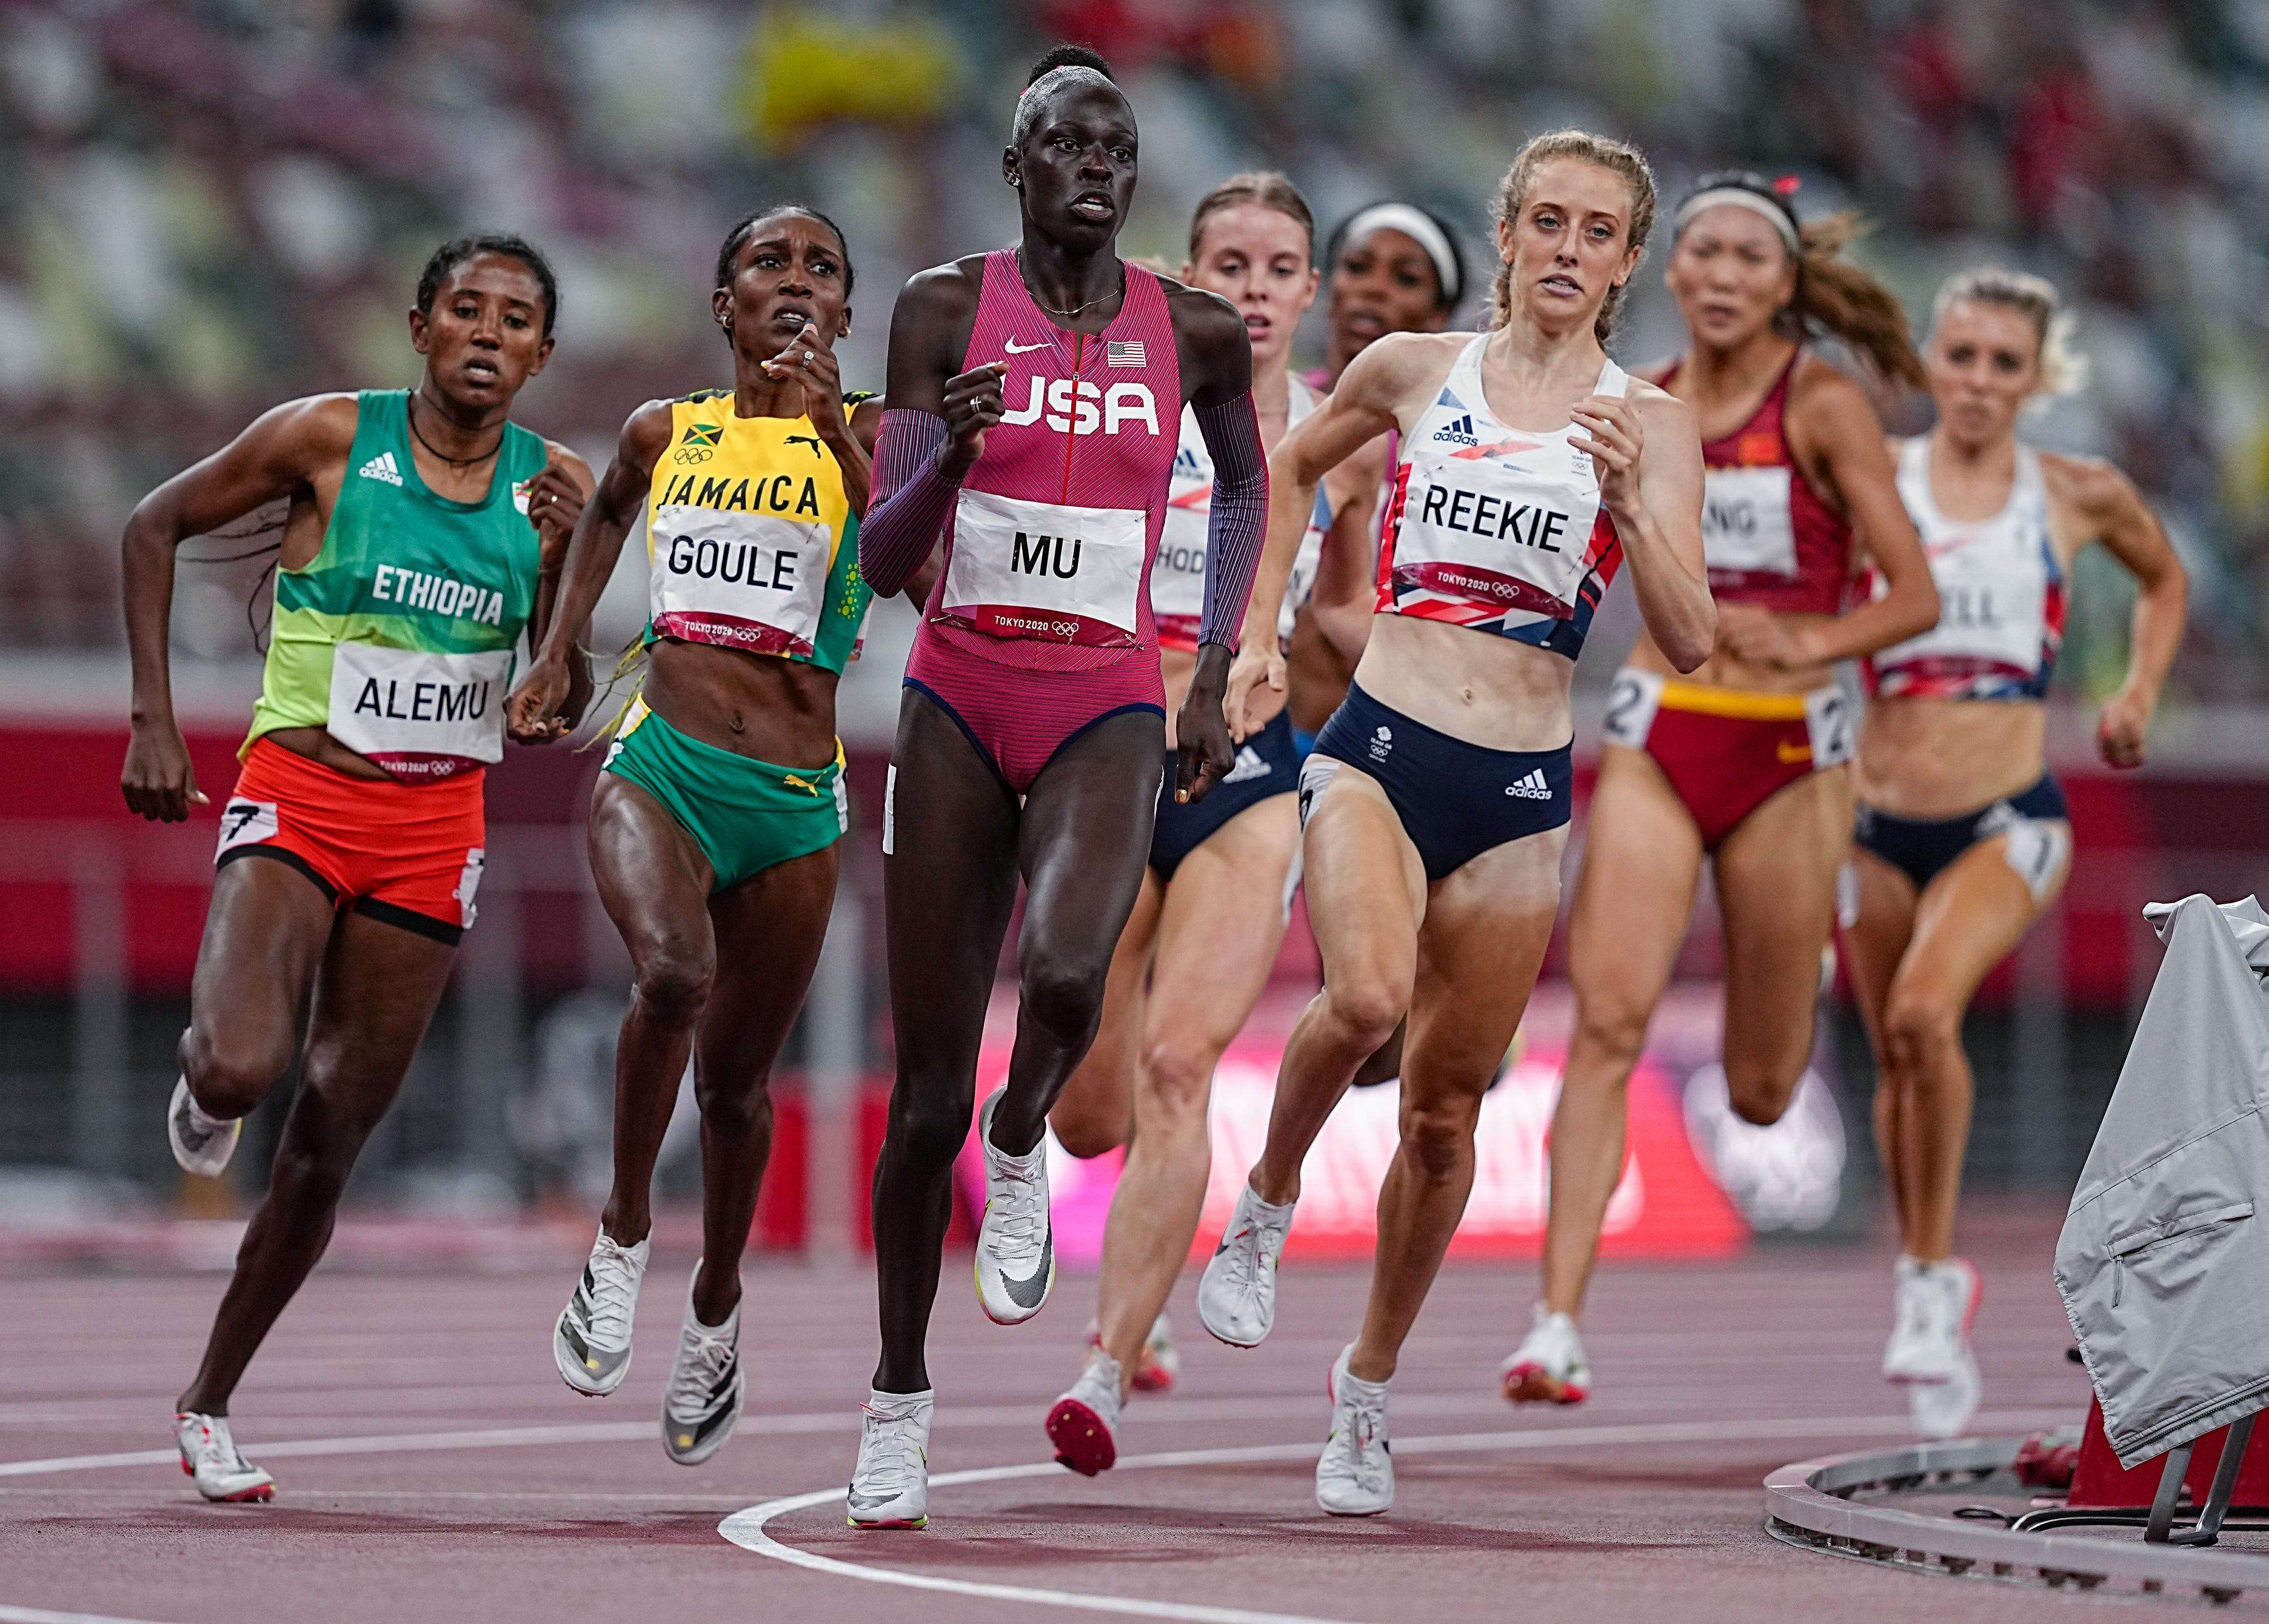 Runners wearing Nike 'super shoes' dominated in the Olympics, taking more than 60% of podium spots |